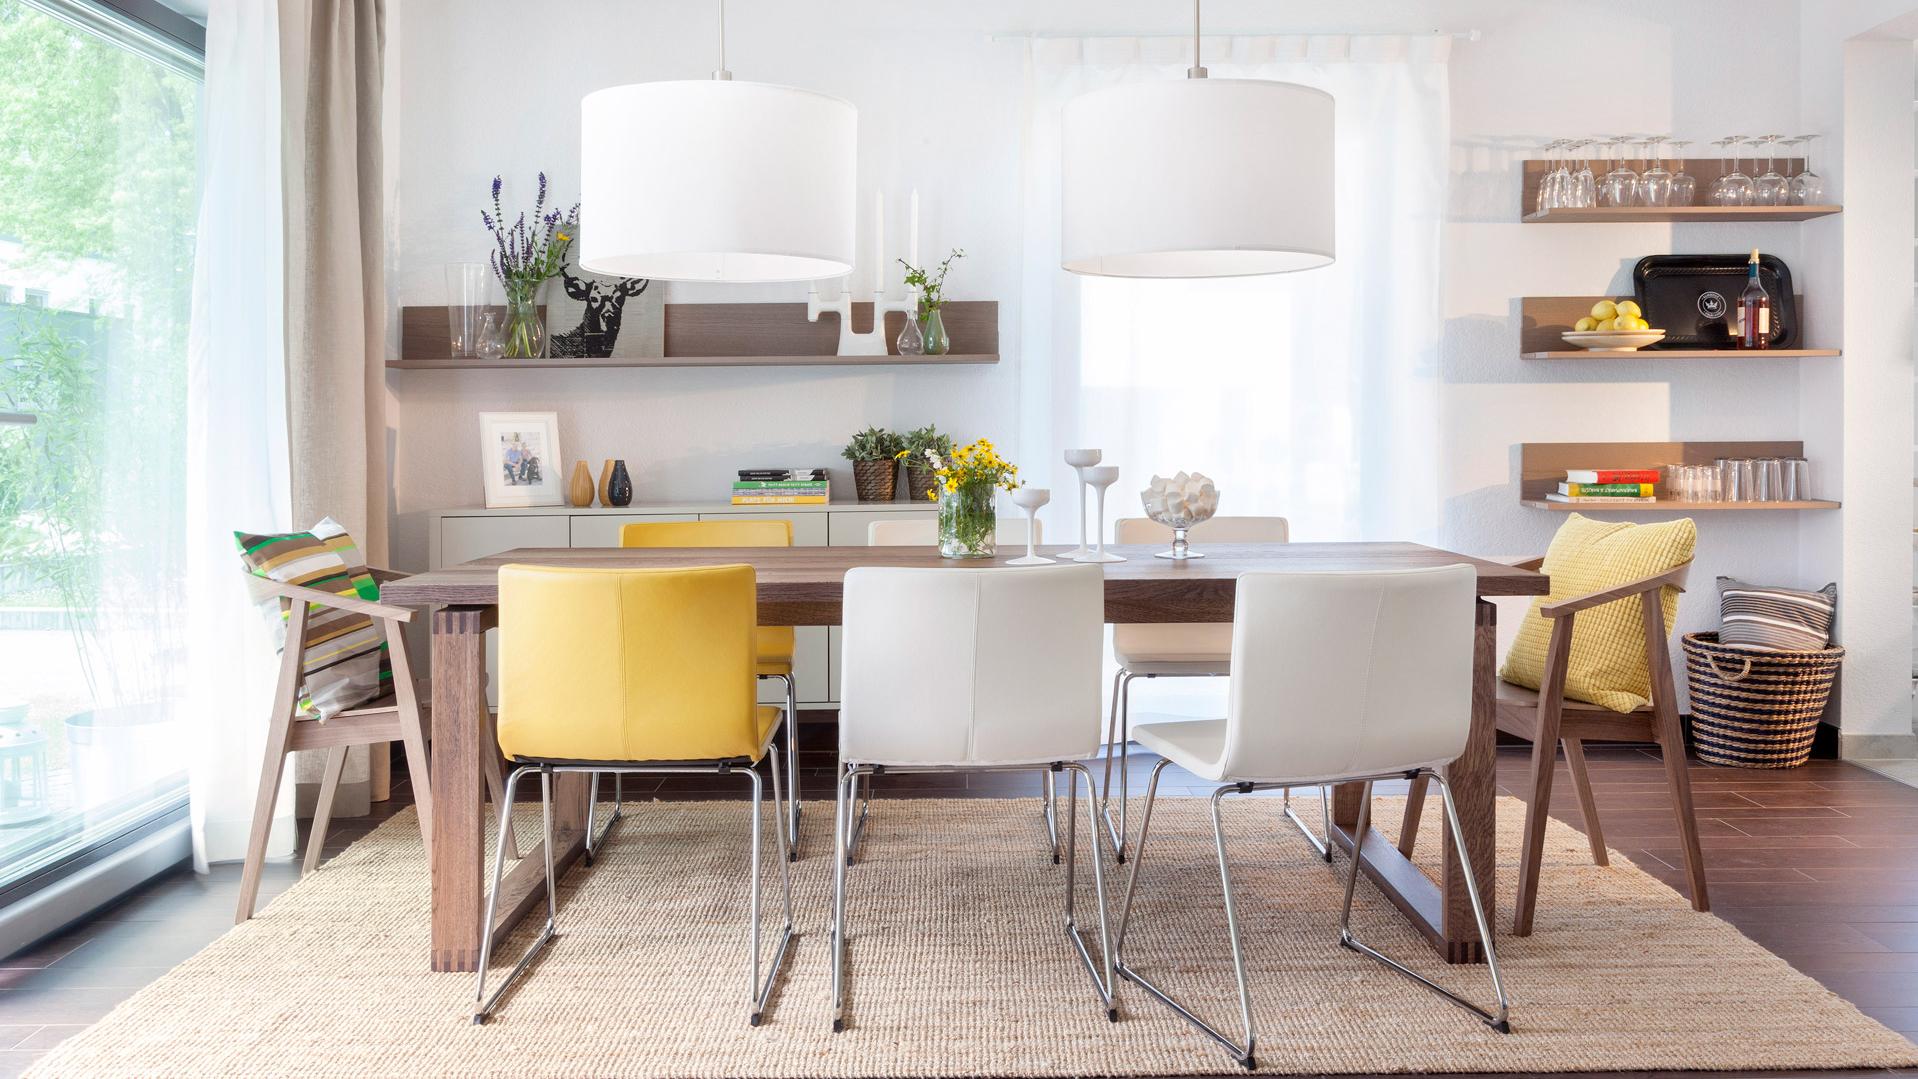 Modern dining room equipped by Ikea